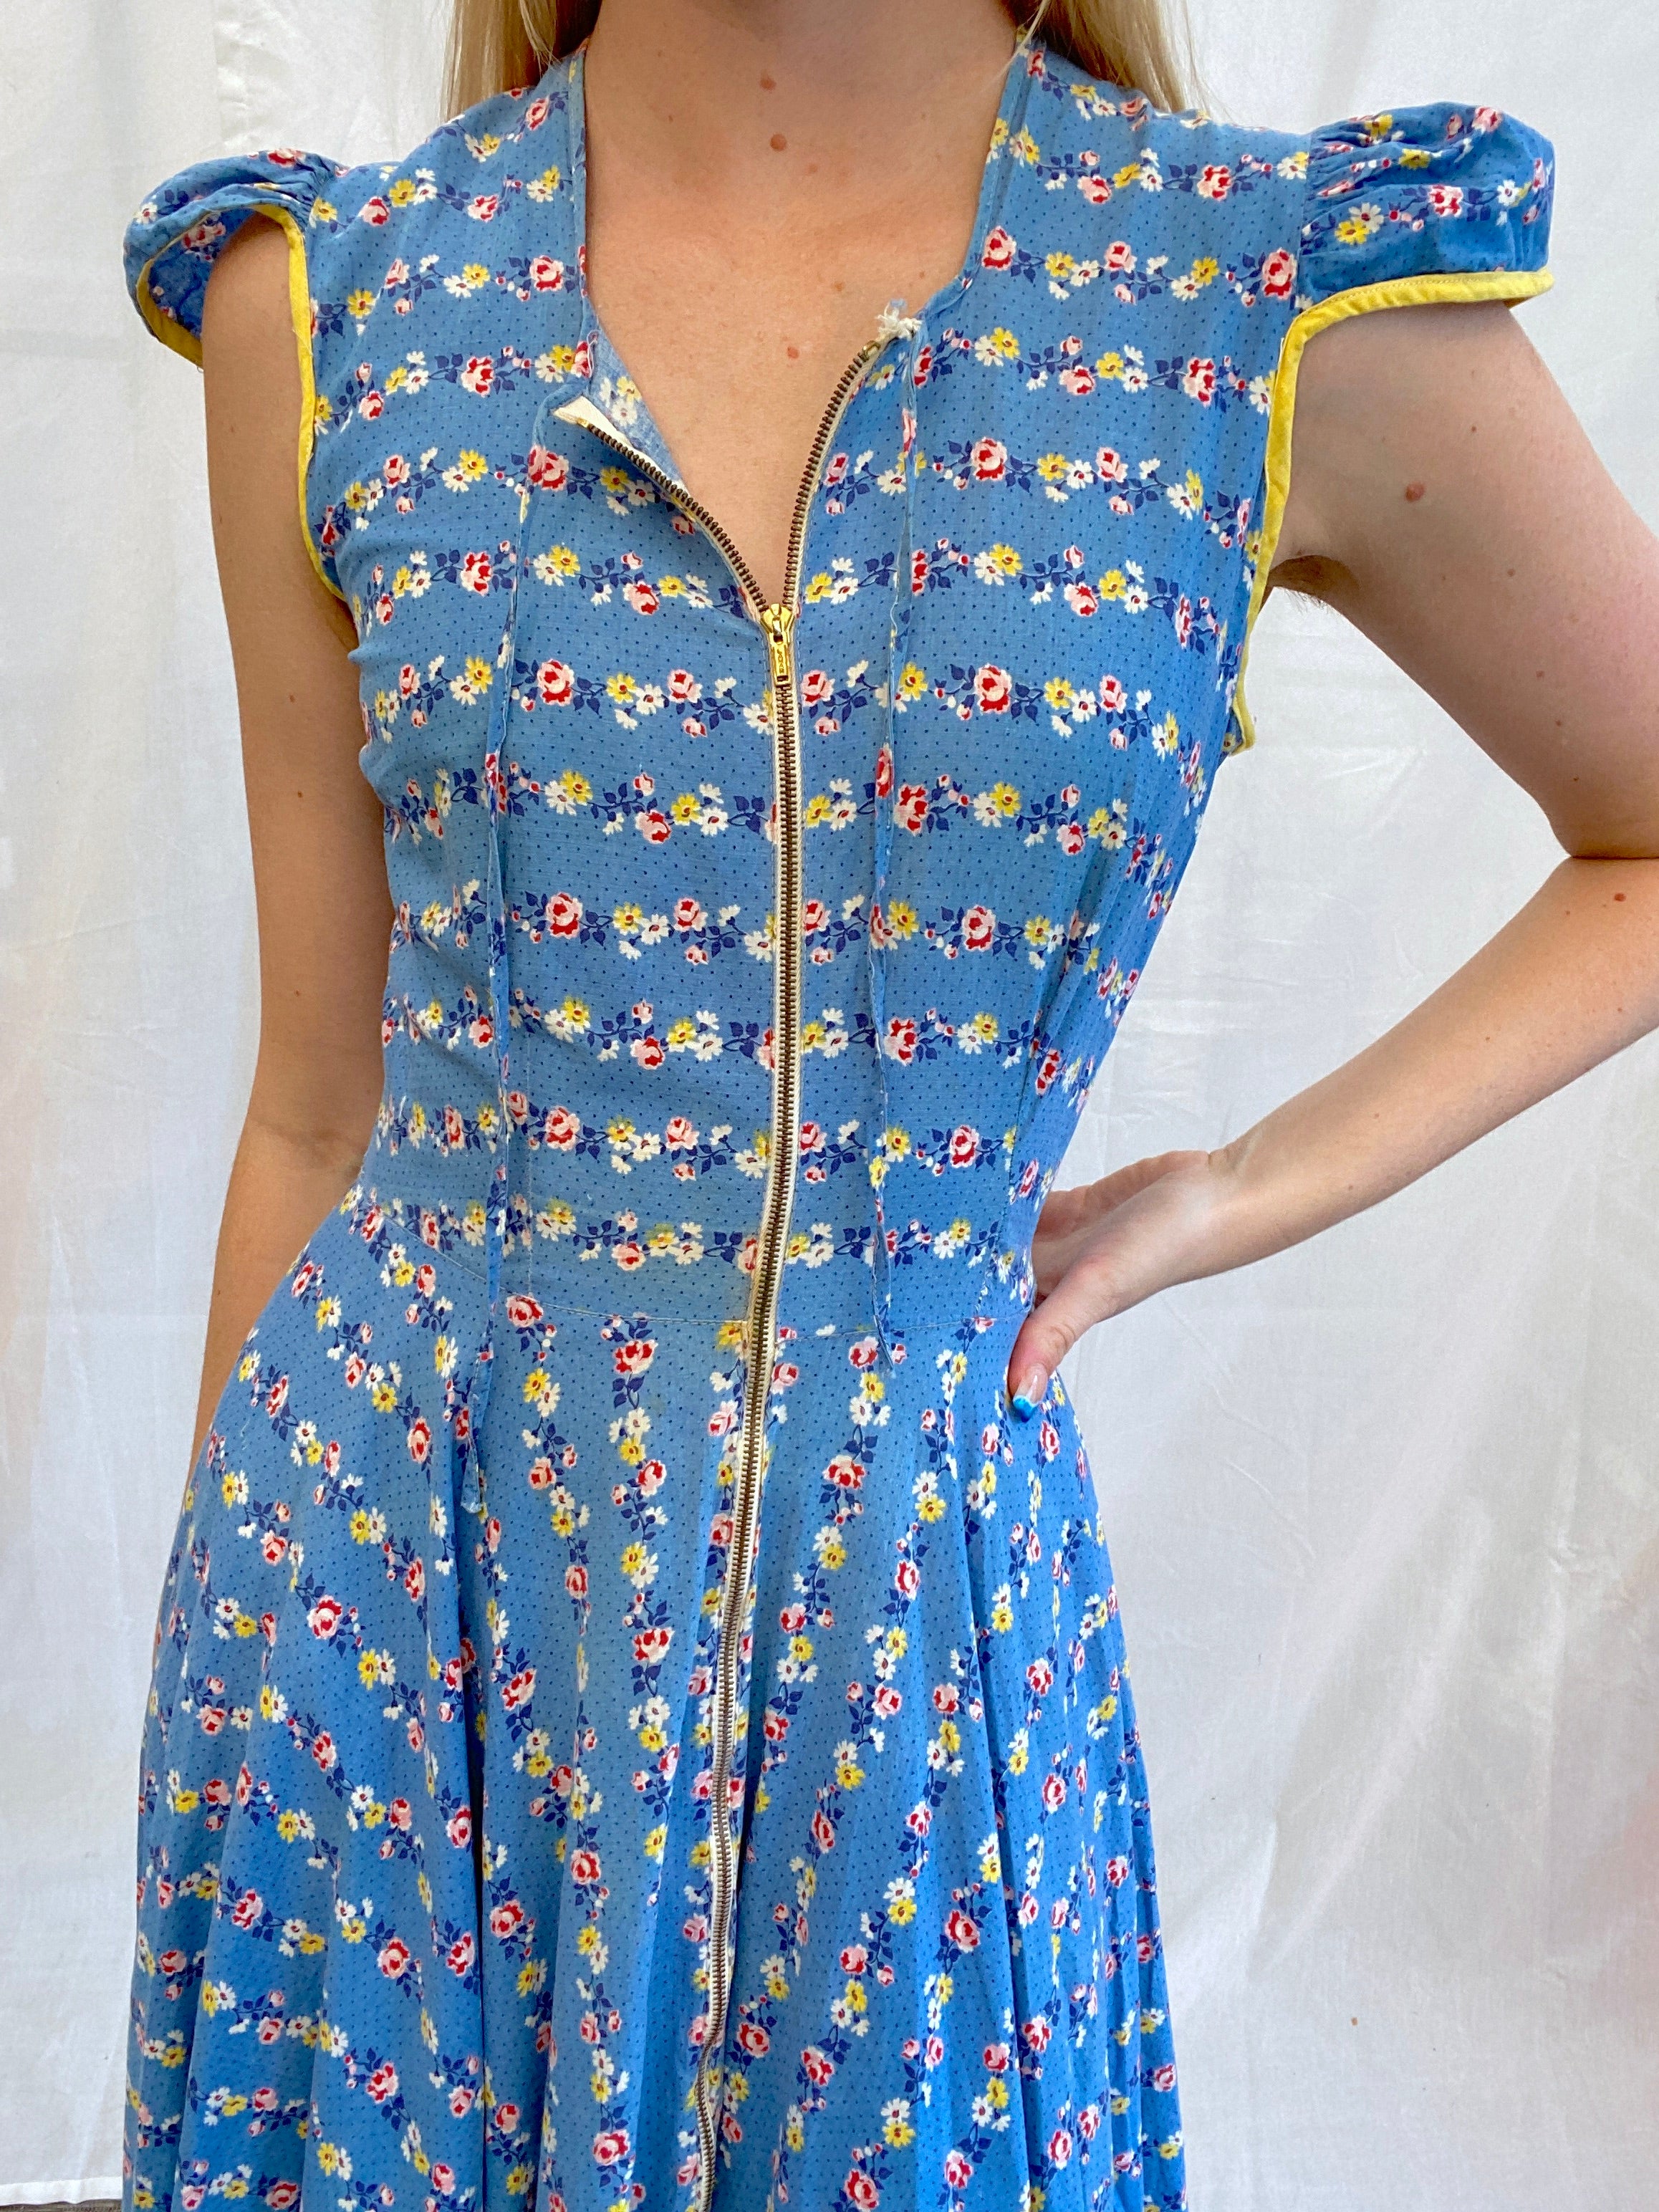 1940's Blue Cotton House Dress with Floral And Polka Dot Print